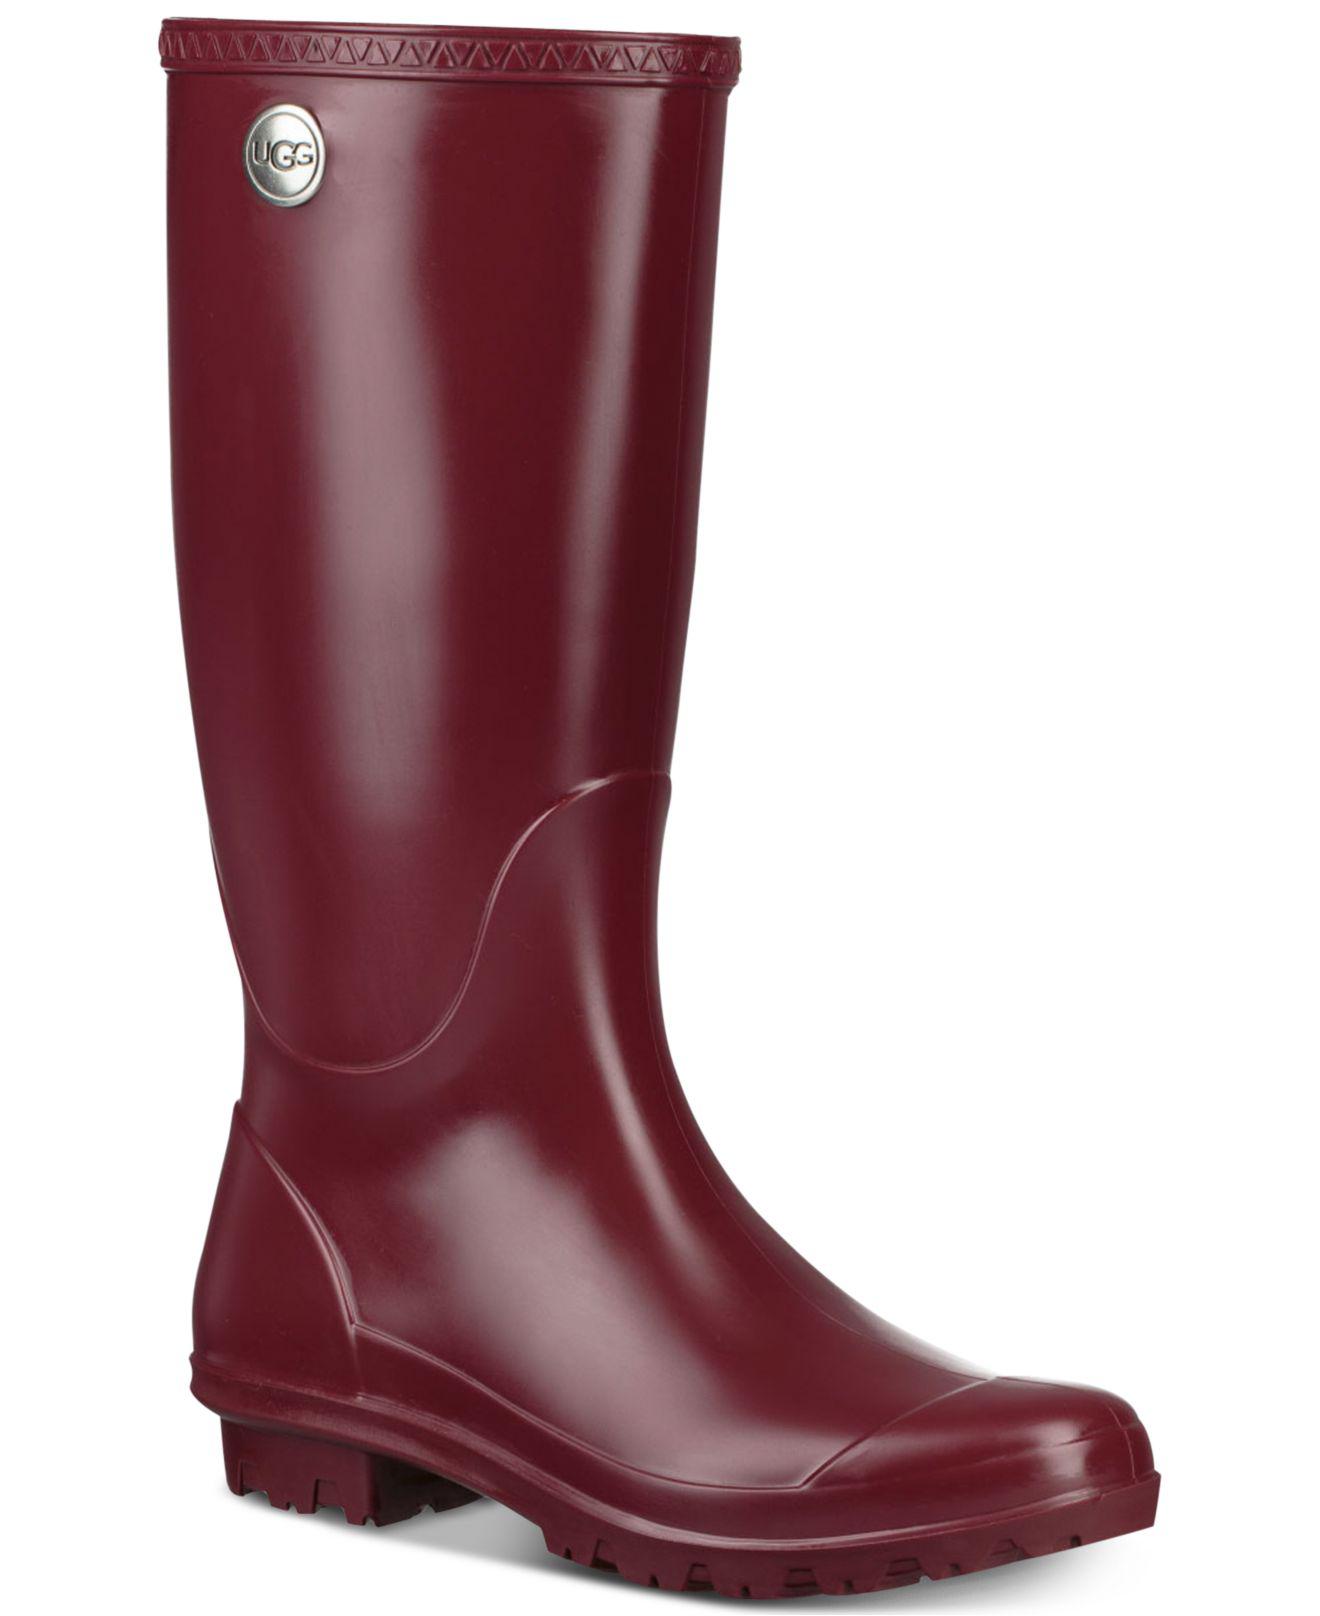 ugg rain boots red